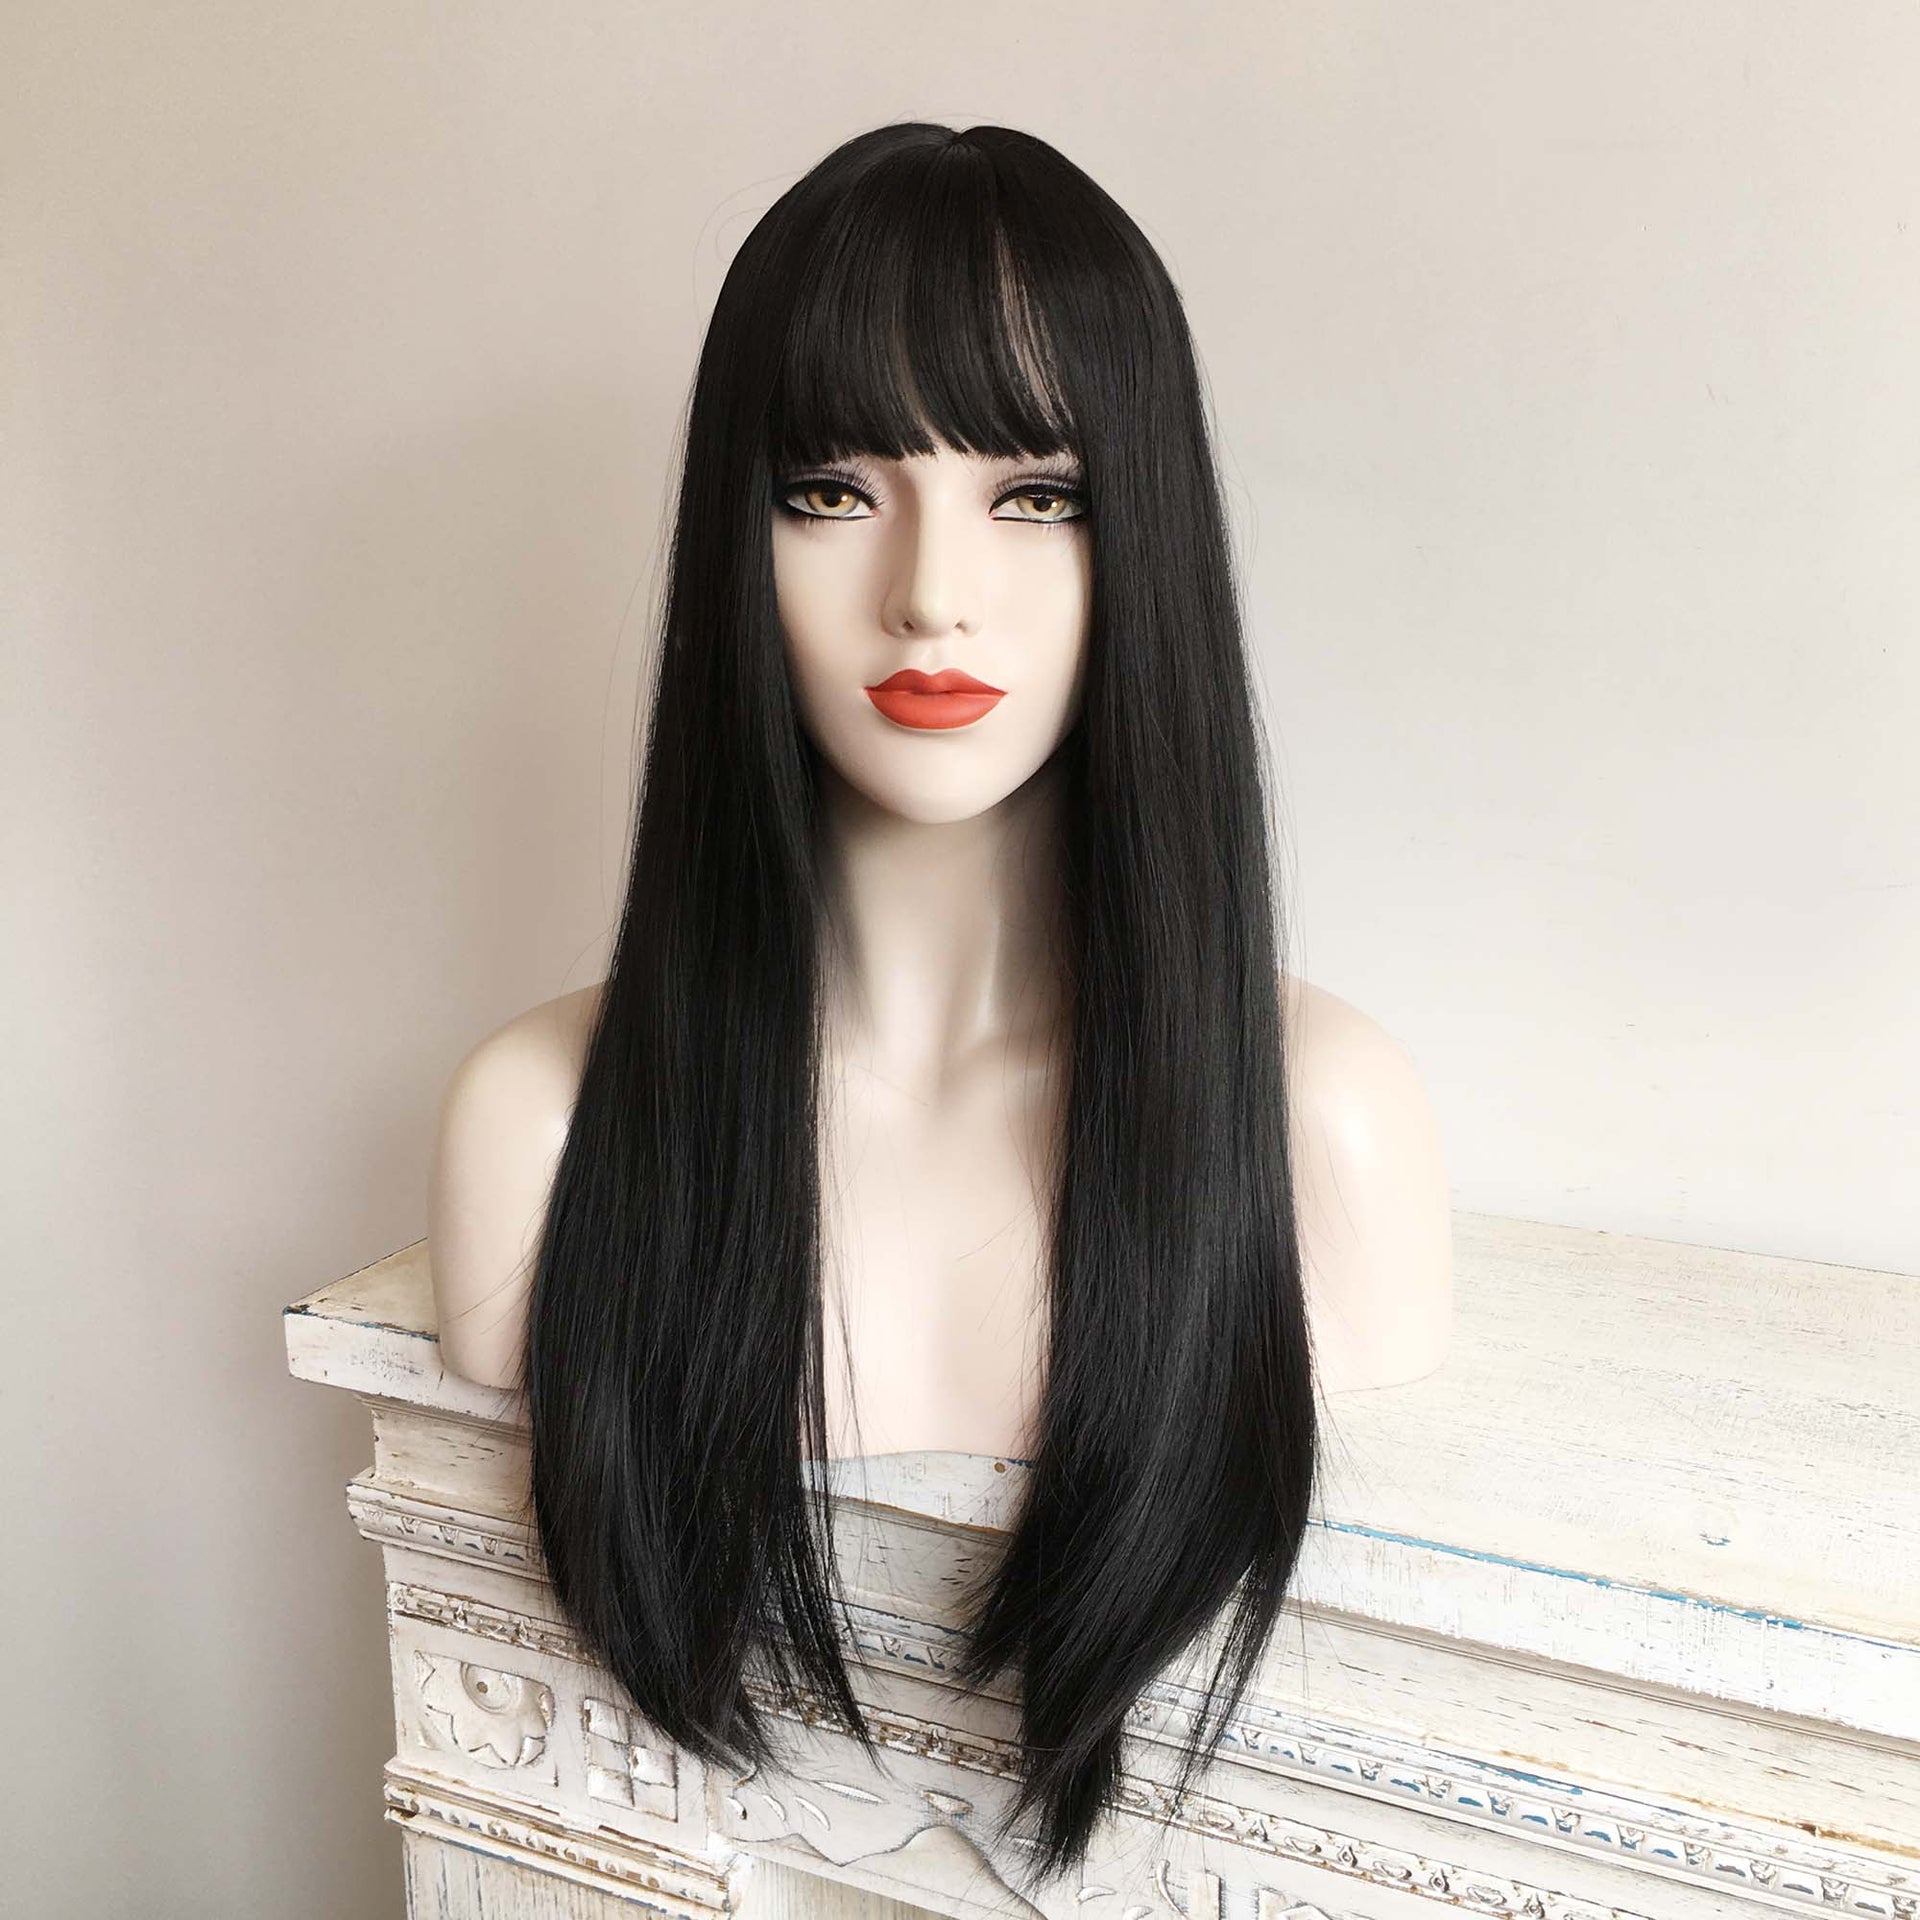 nevermindyrhead Blonde Ombre Long Straight Wig With Fringe Bangs Top Skin 4 Colours For Women 24 Inches Black